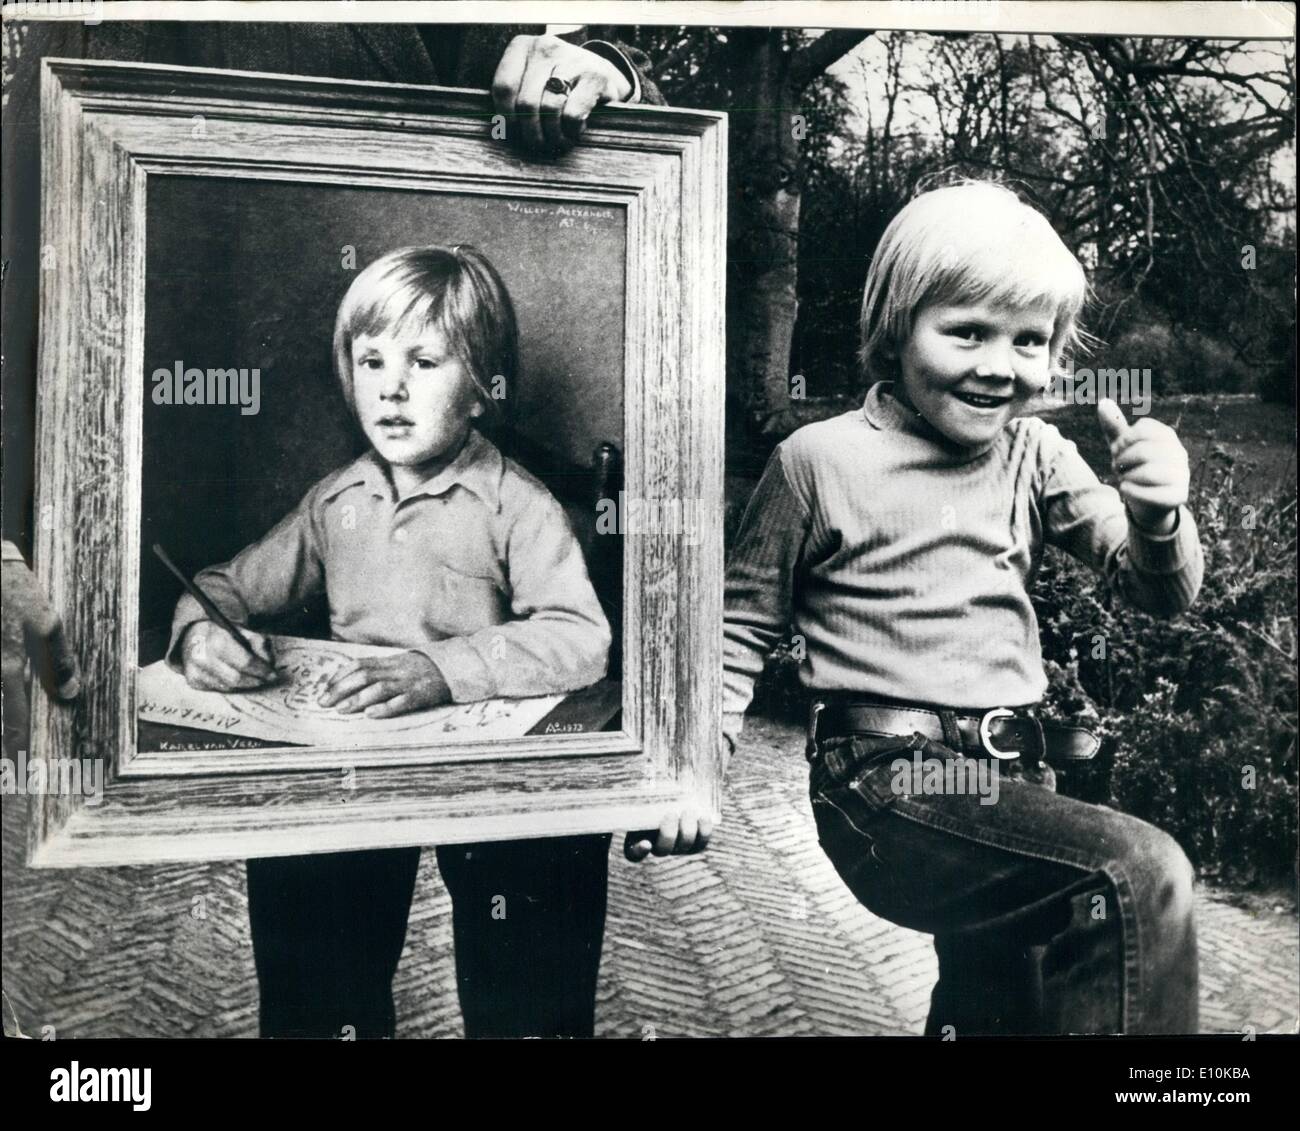 apr-04-1973-prince-willem-alexander-of-holland-presented-with-a-painting-E10KBA.jpg